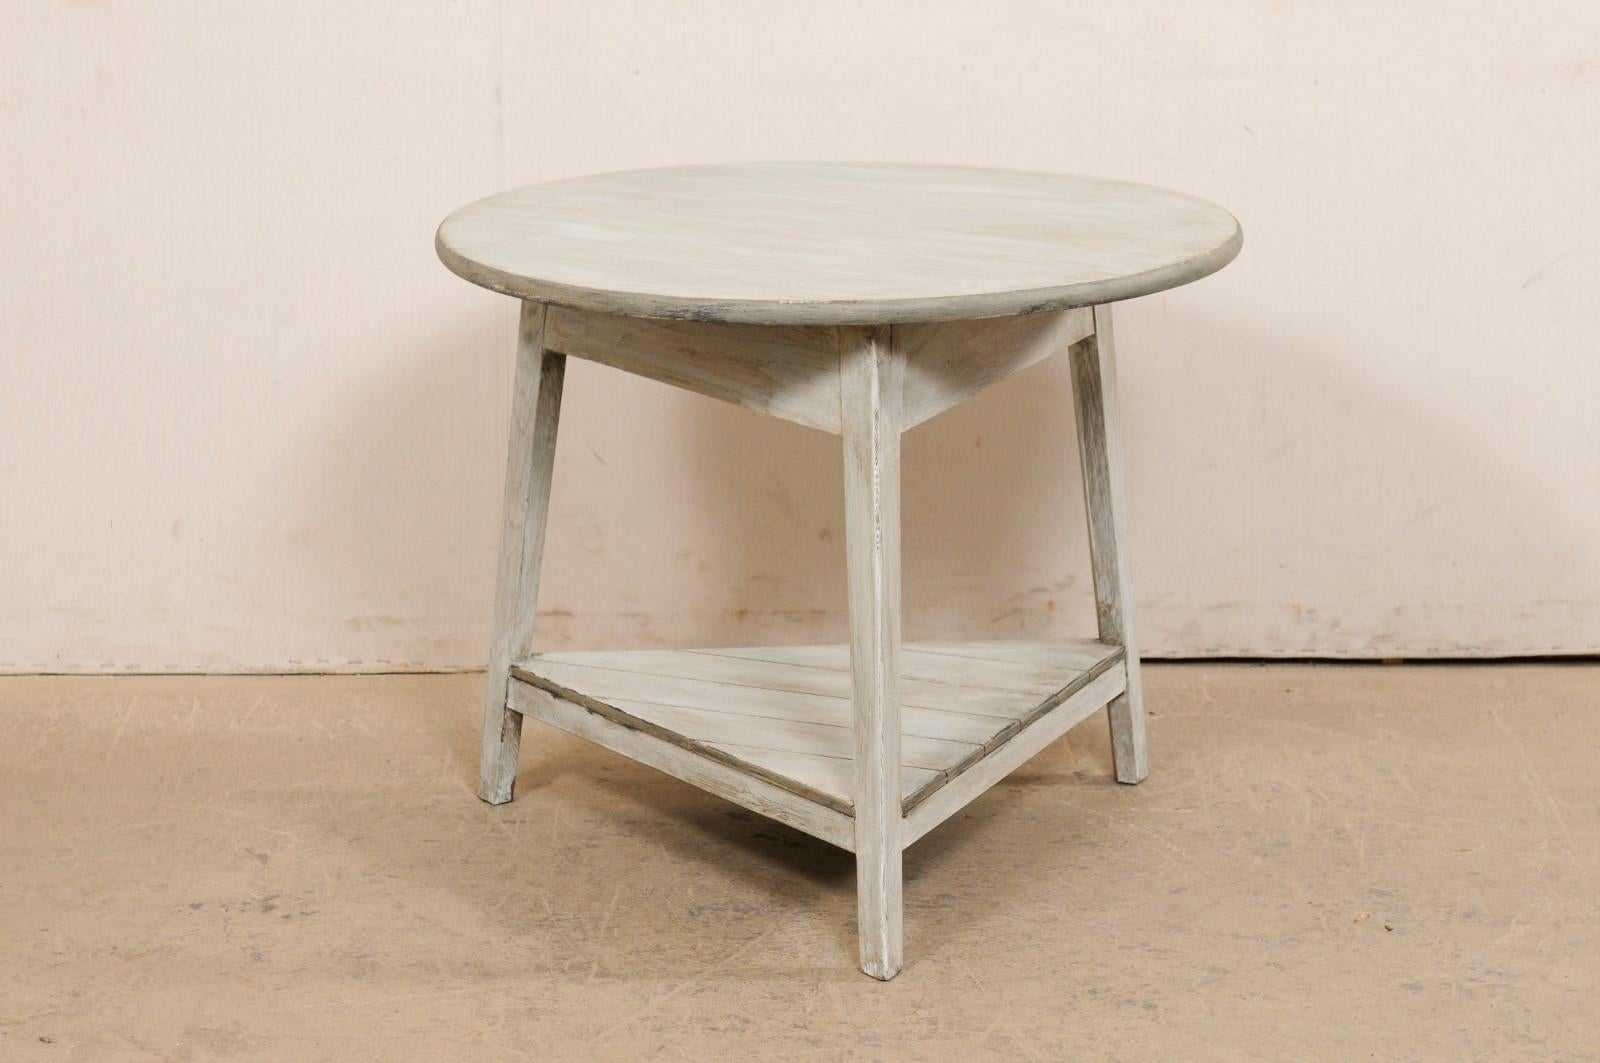 An English painted wood center table with shelf from the early 20th century. This super cute antique table from England has a round-shaped top, which rests above a triangular-shaped apron, with a triangular stretchered lower shelf beneath, which is